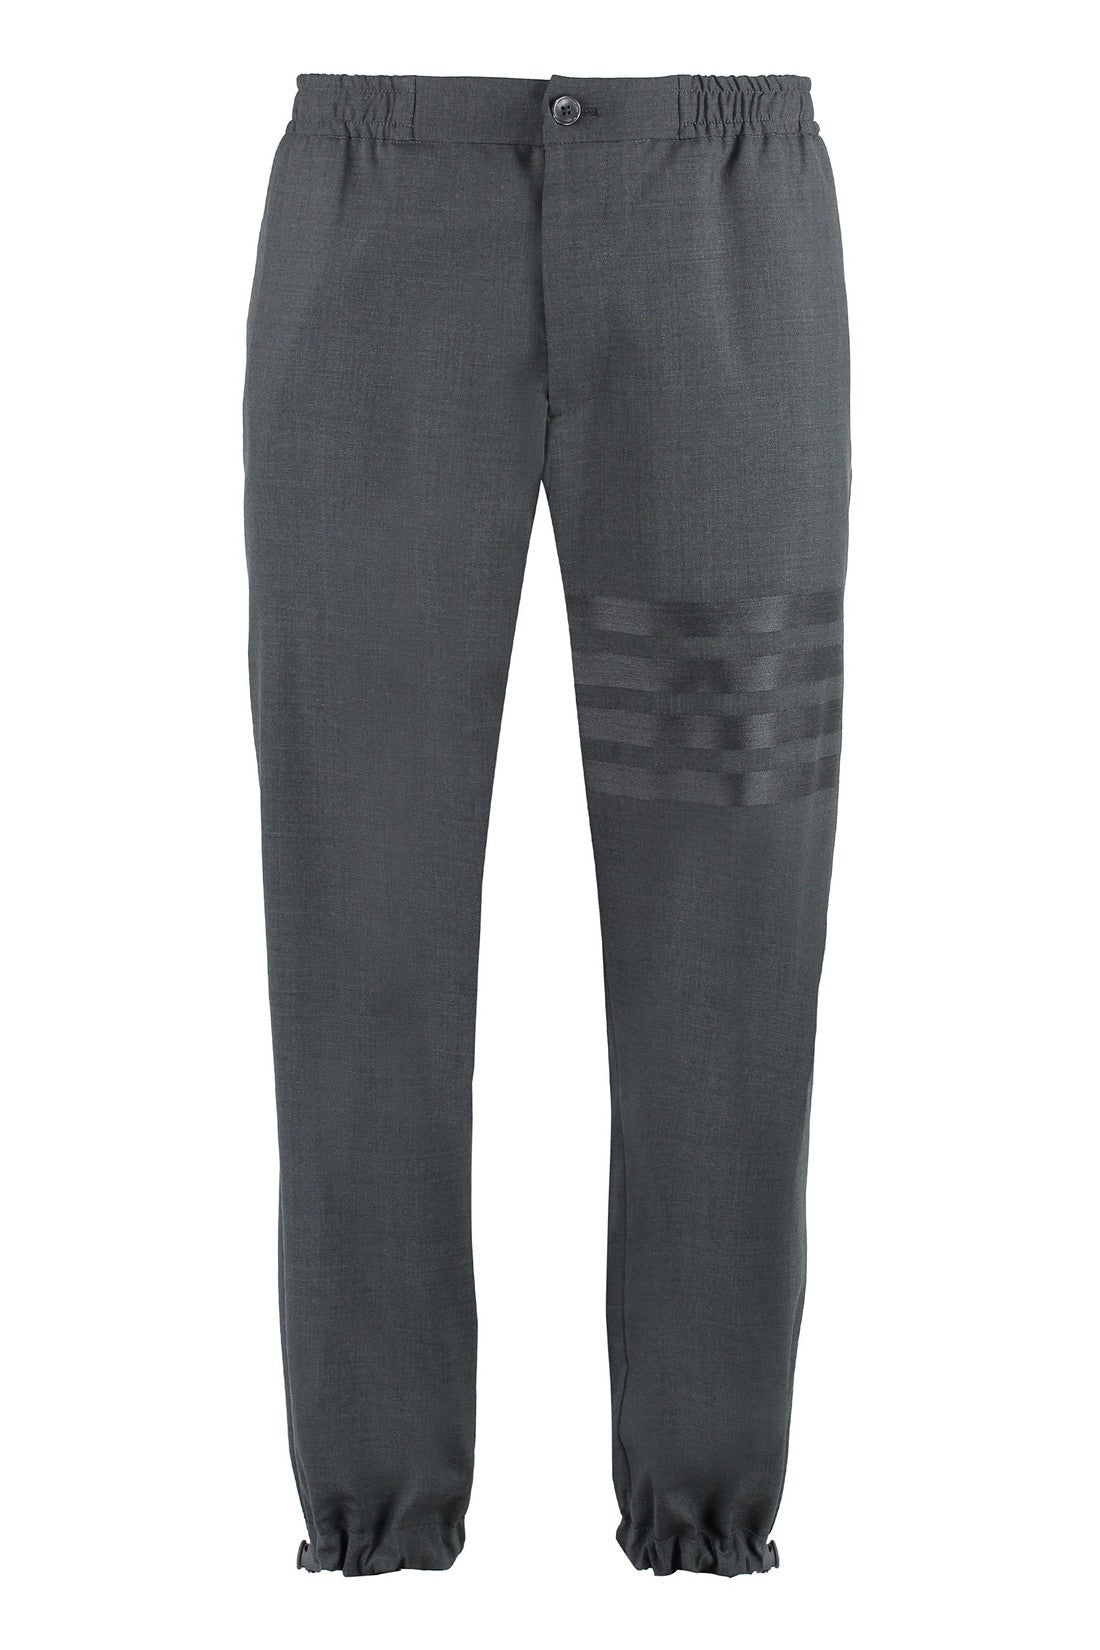 Thom Browne-OUTLET-SALE-Wool trousers-ARCHIVIST